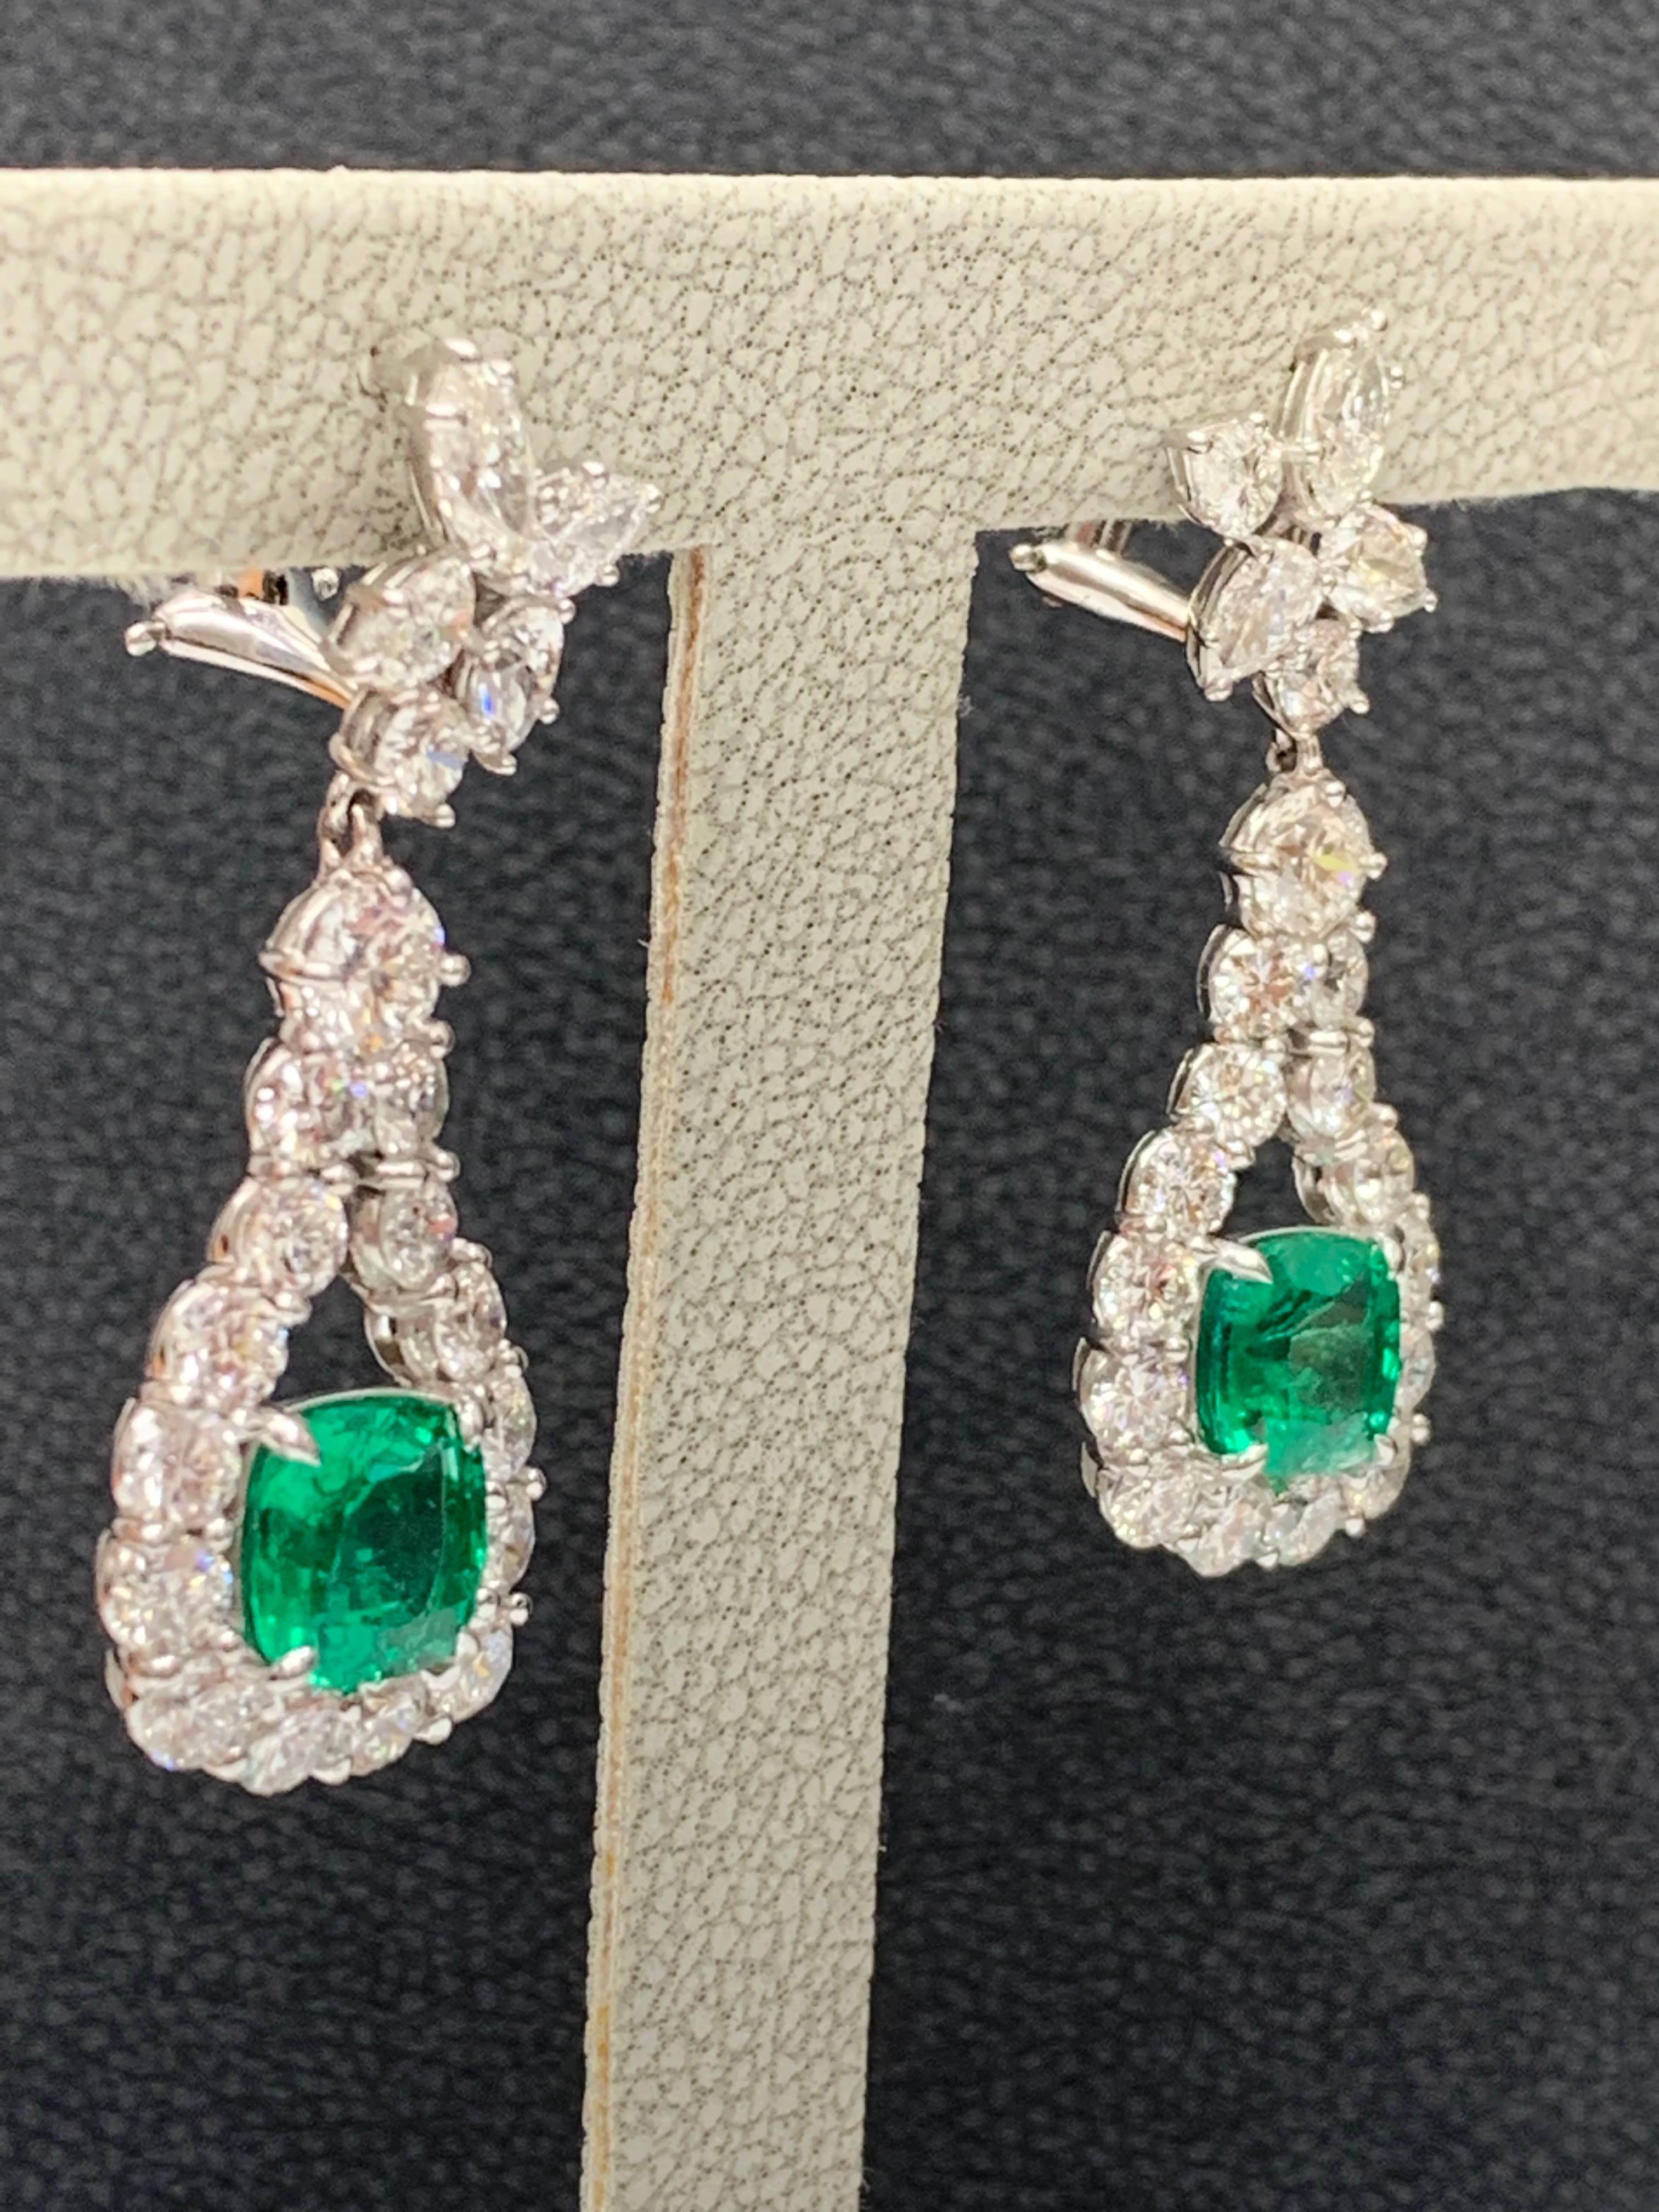 3.49 Carat Cushion Cut Emerald and Diamond Drop Earrings in 18K White Gold For Sale 2